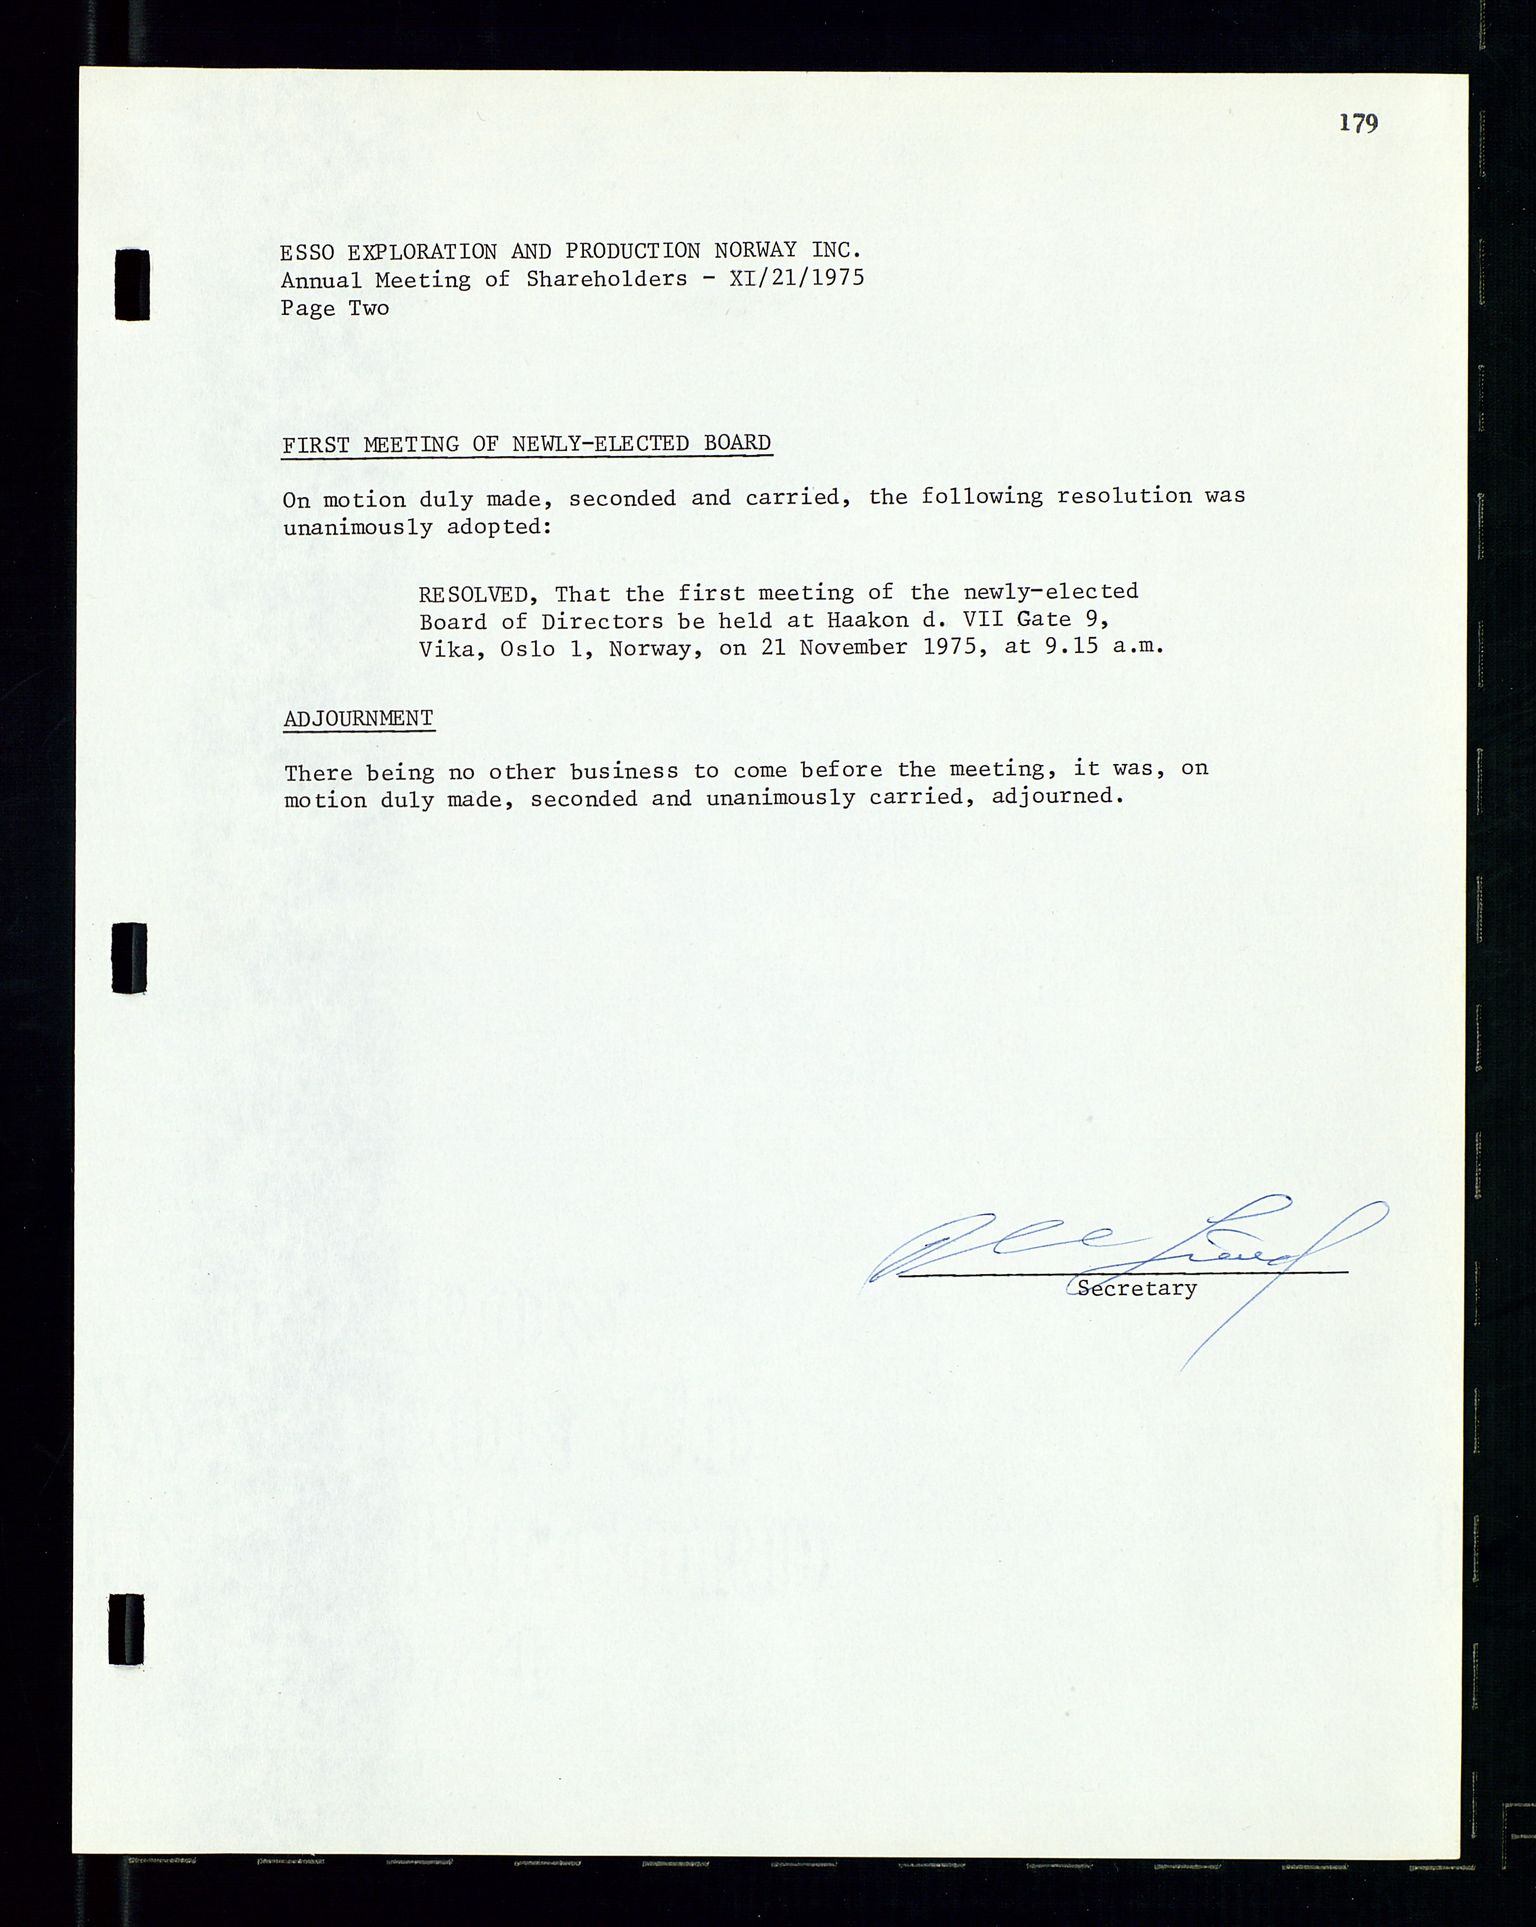 Pa 1512 - Esso Exploration and Production Norway Inc., SAST/A-101917/A/Aa/L0001/0002: Styredokumenter / Corporate records, Board meeting minutes, Agreements, Stocholder meetings, 1975-1979, s. 10